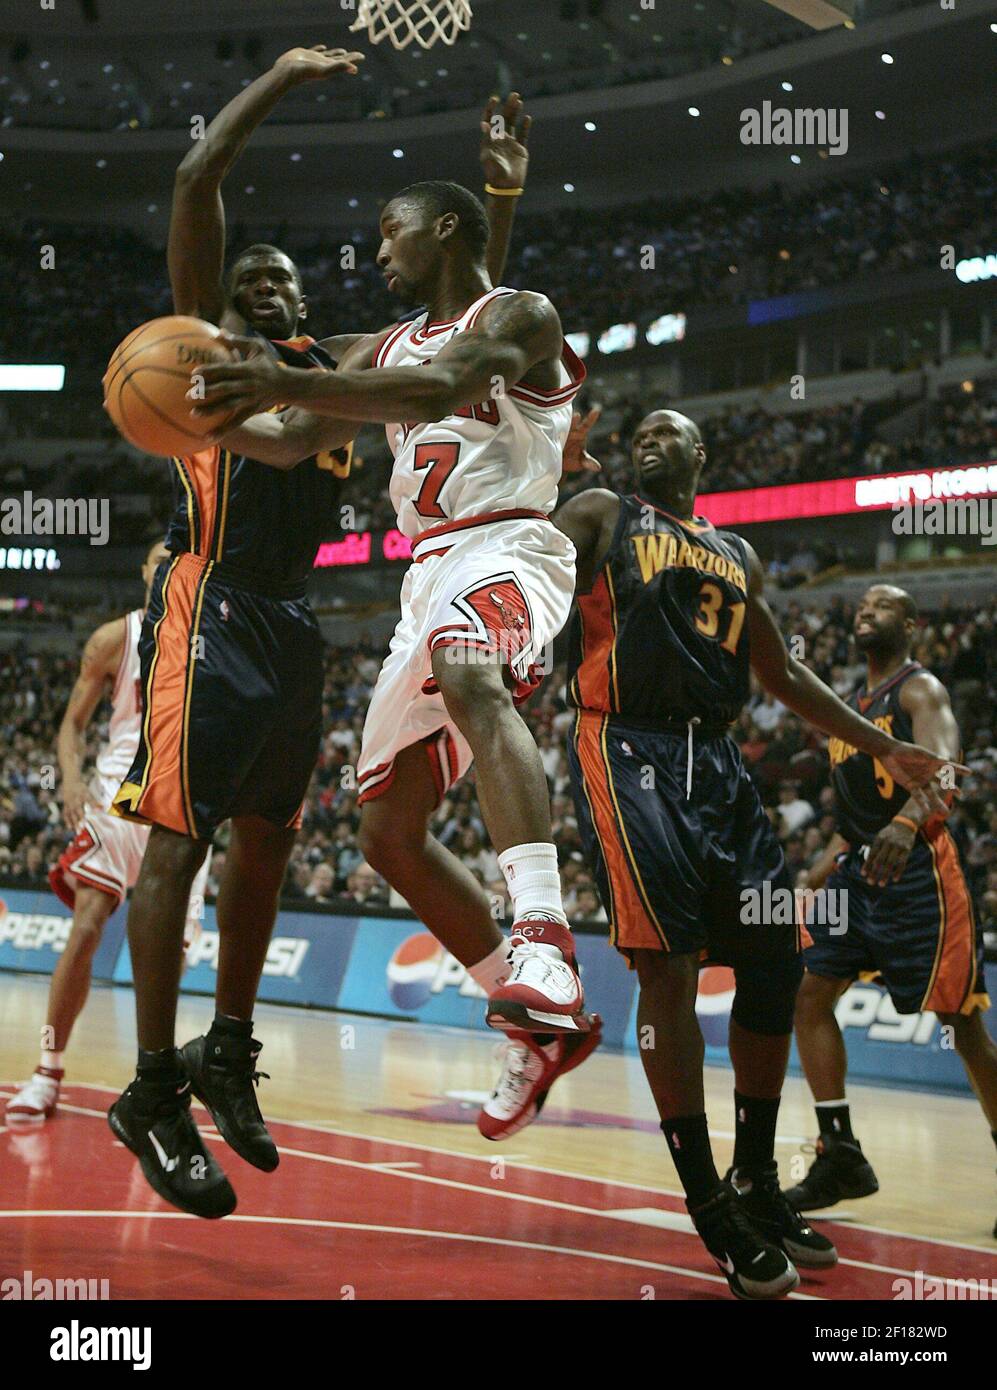 Chicago Bulls guard Ben Gordon (R) drives by New Jersey Nets guard Keyon  Dooling during the third quarter at the United Center in Chicago on April  4, 2009. The Bulls won 103-94. (